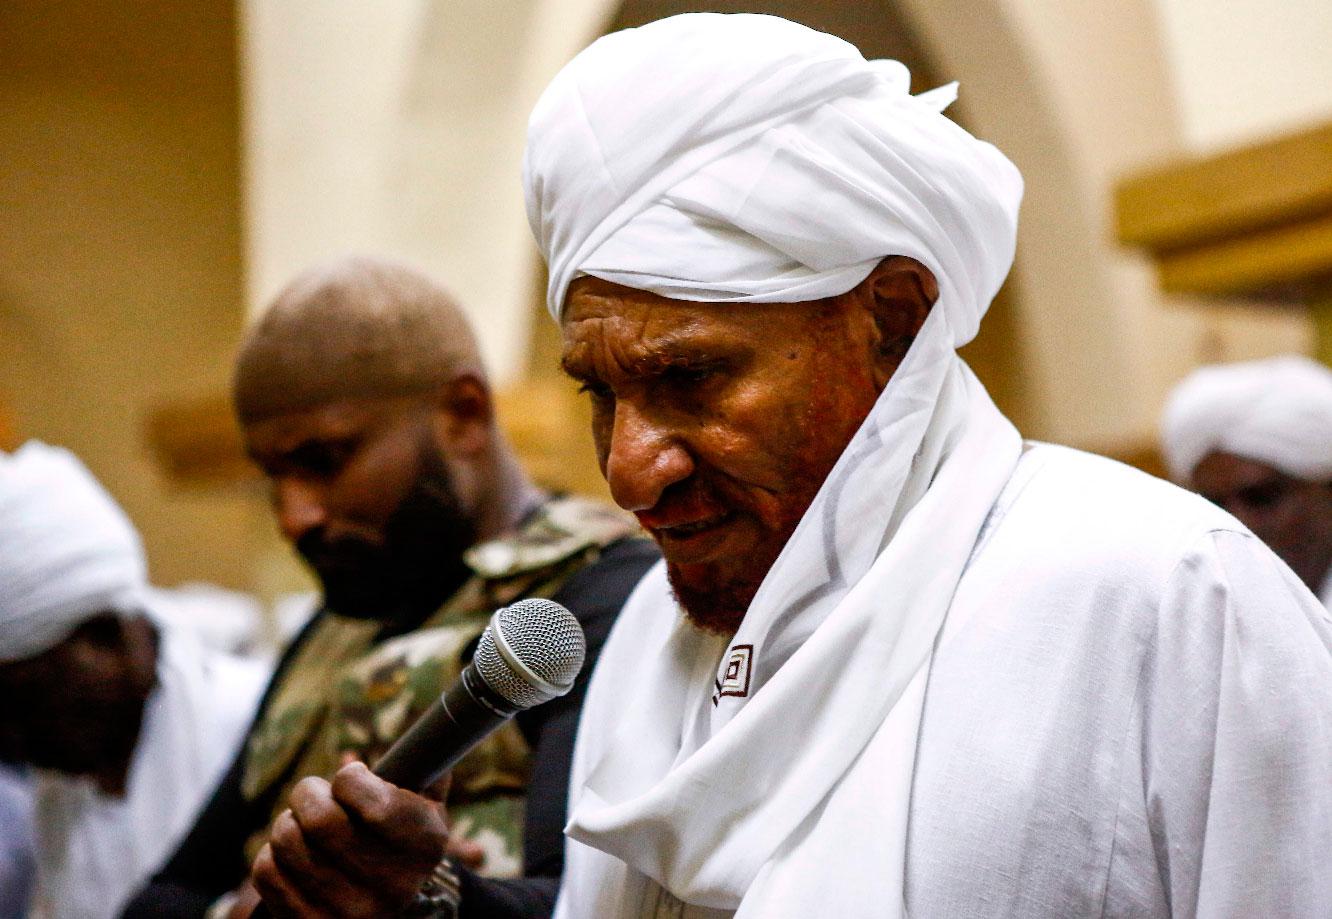 Sadiq al-Mahdi, Sudan's ex-prime minister and leader of the opposition Umma Party, prays in a mosque in the capital Khartoum's twin city of Omdurman on December 19, 2018.